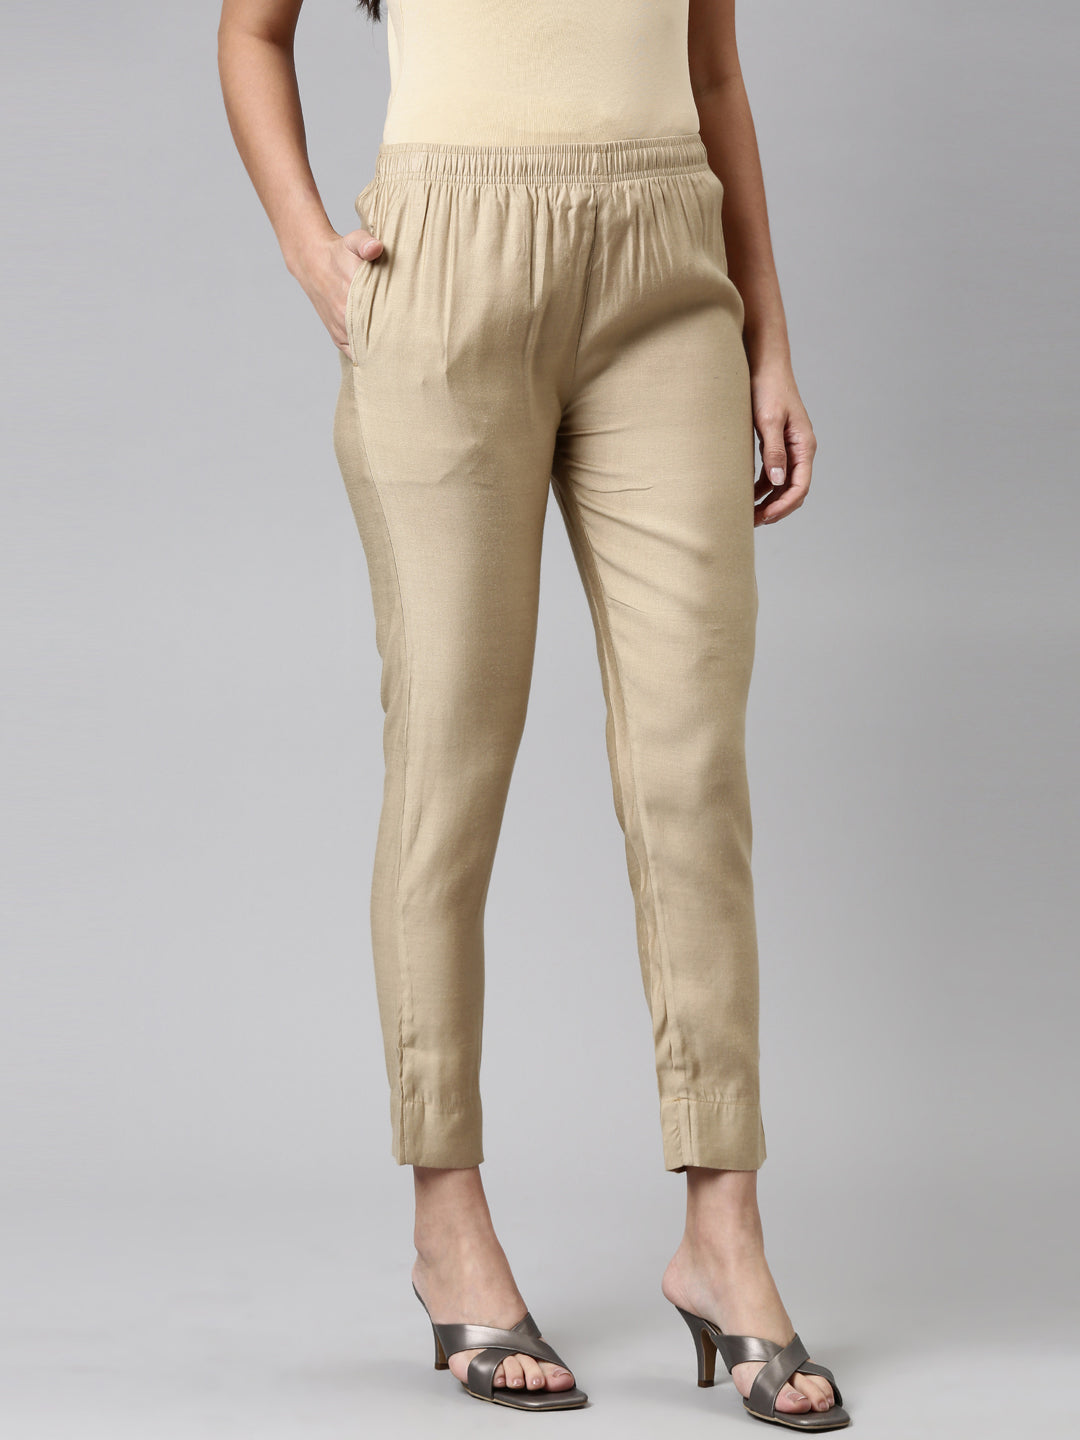 Buy GO COLORS Gold Womens Solid Casual Pants